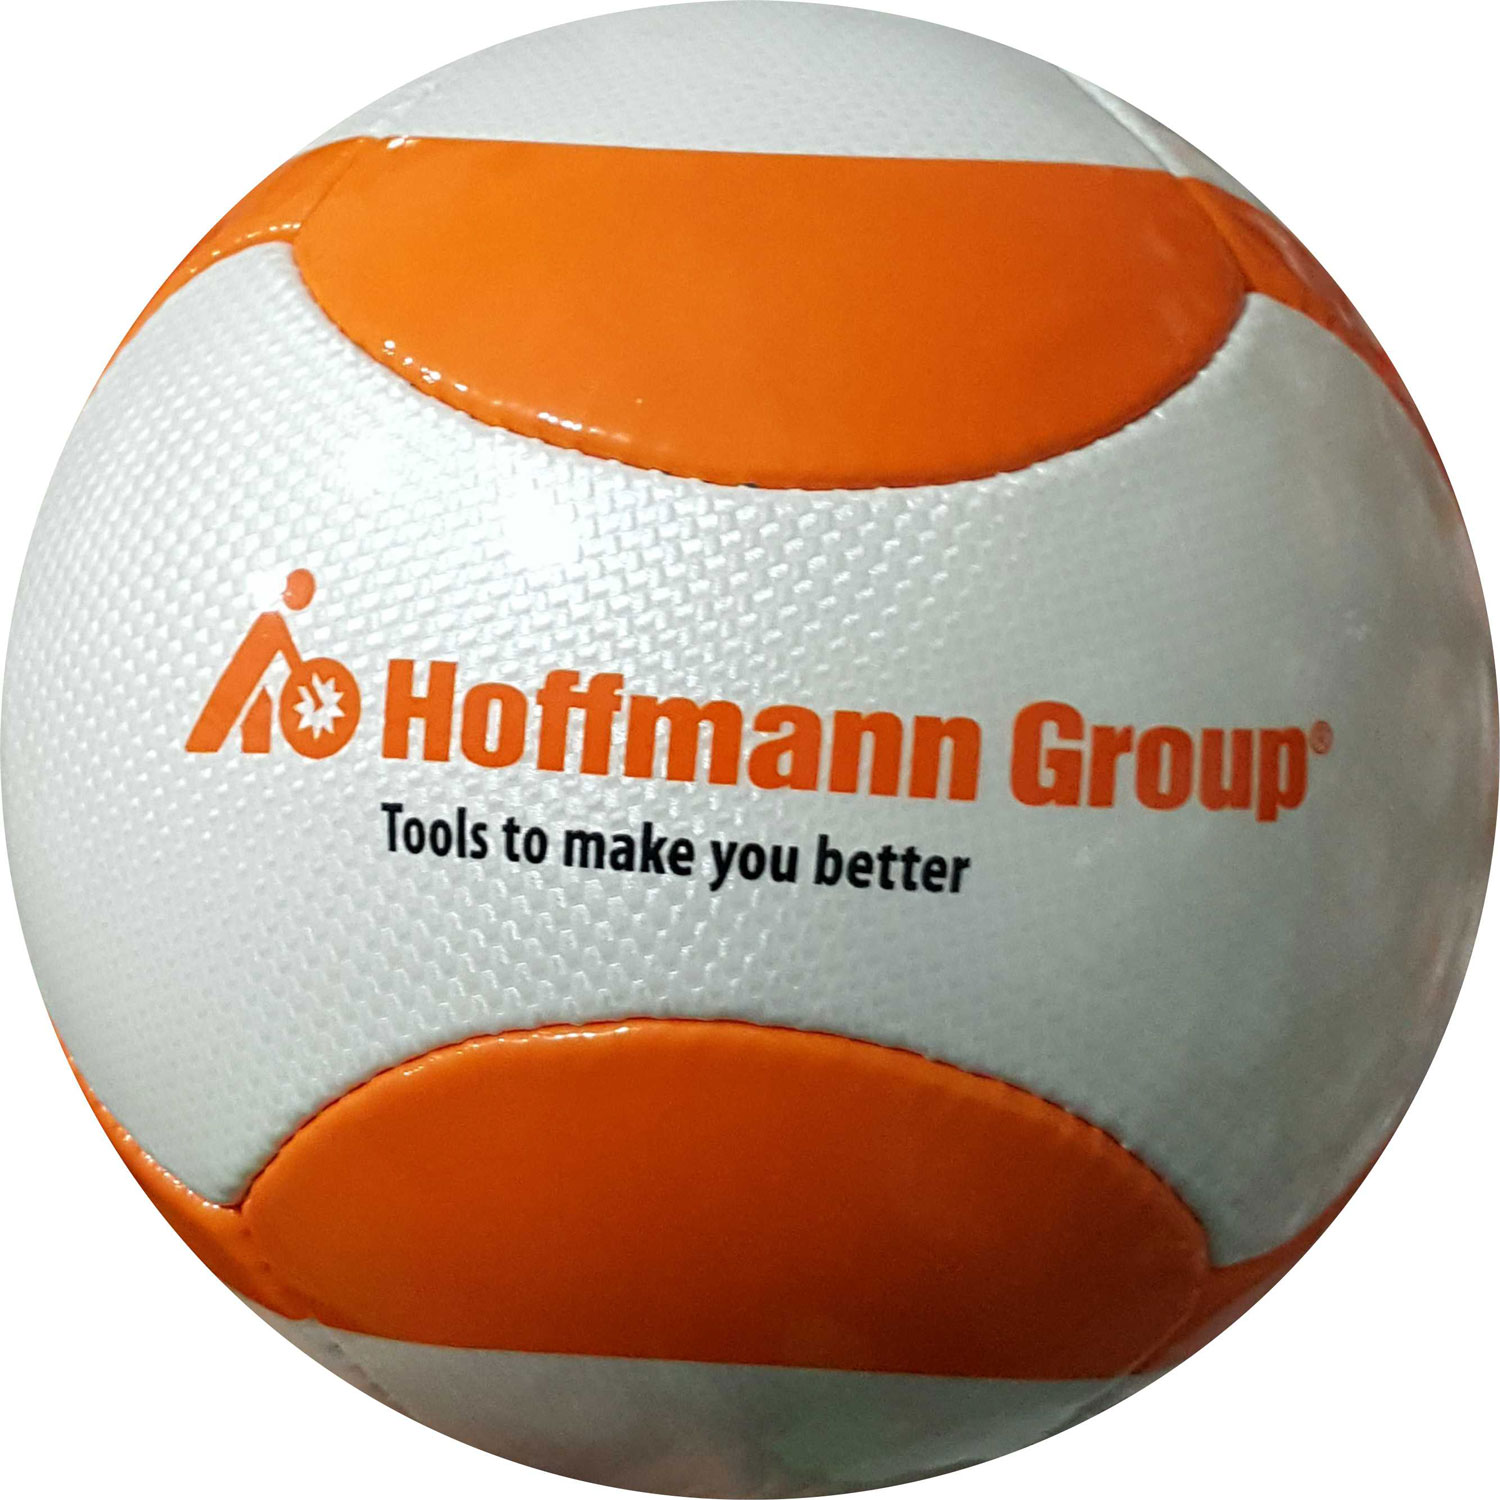 Customized soccer balls - promotional footballs printed conveniently